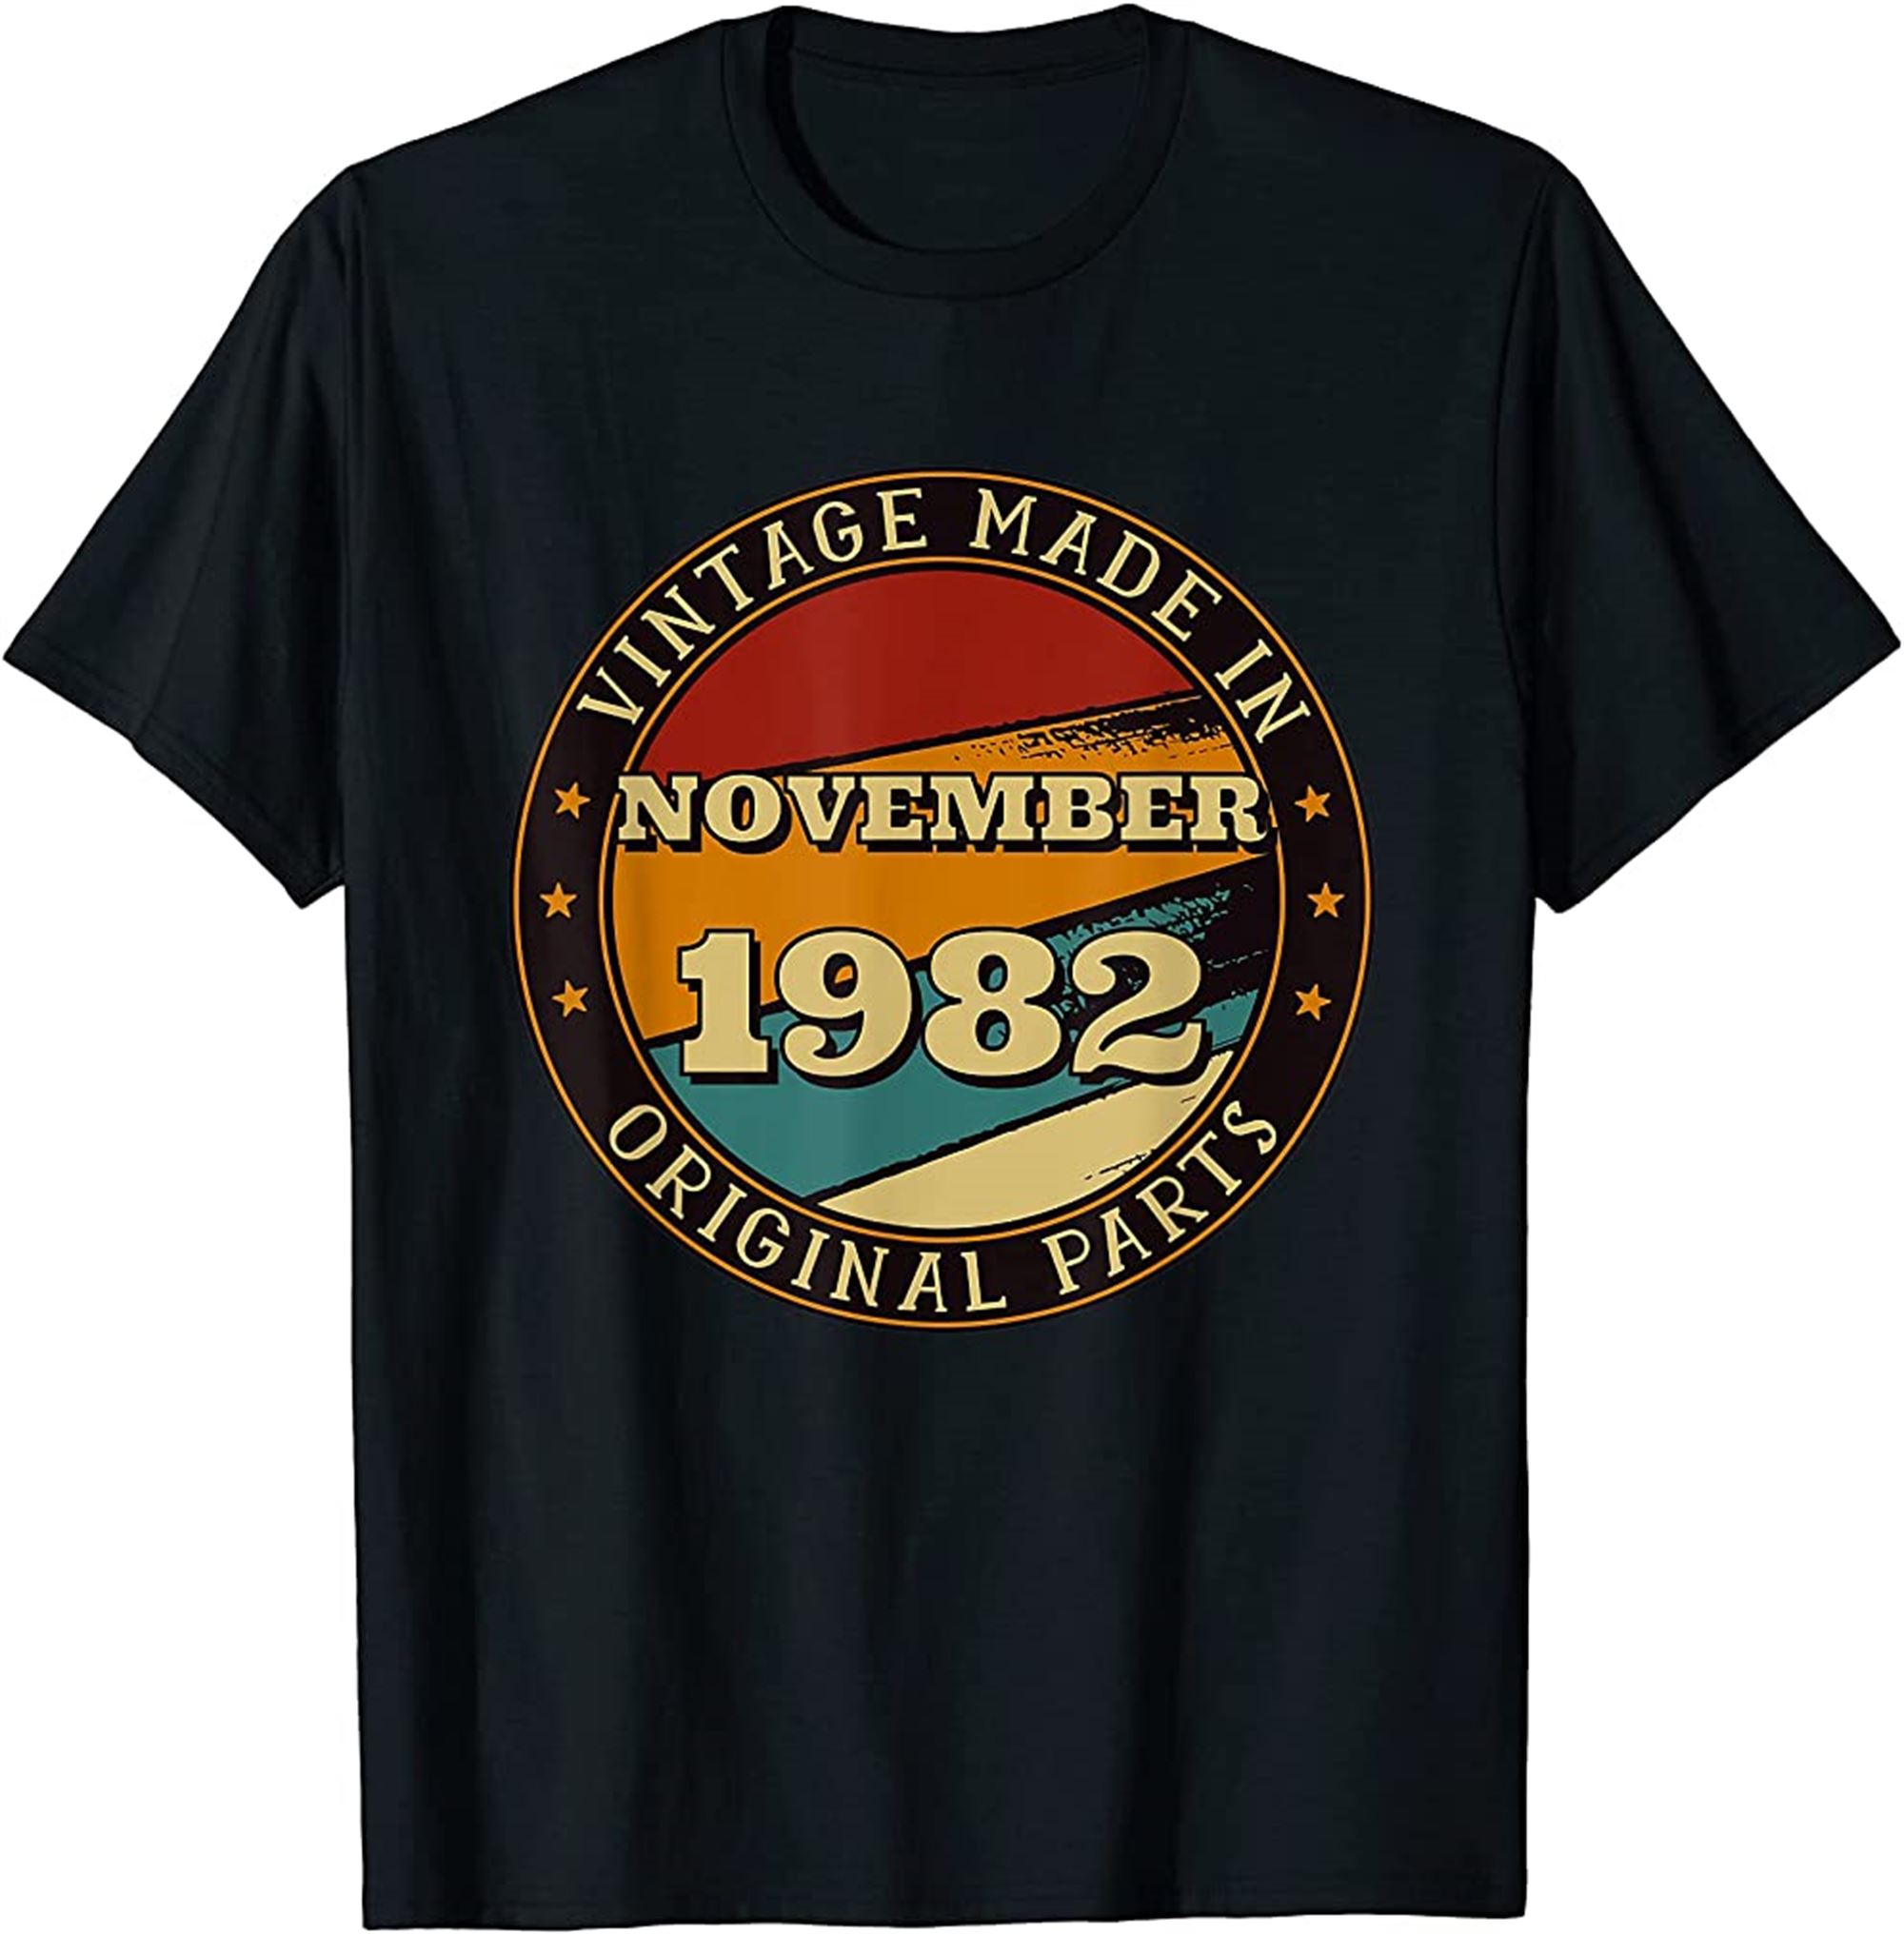 Vintage Made In November 1982 Birthday Original Parts T-shirt Full Size Up To 5xl